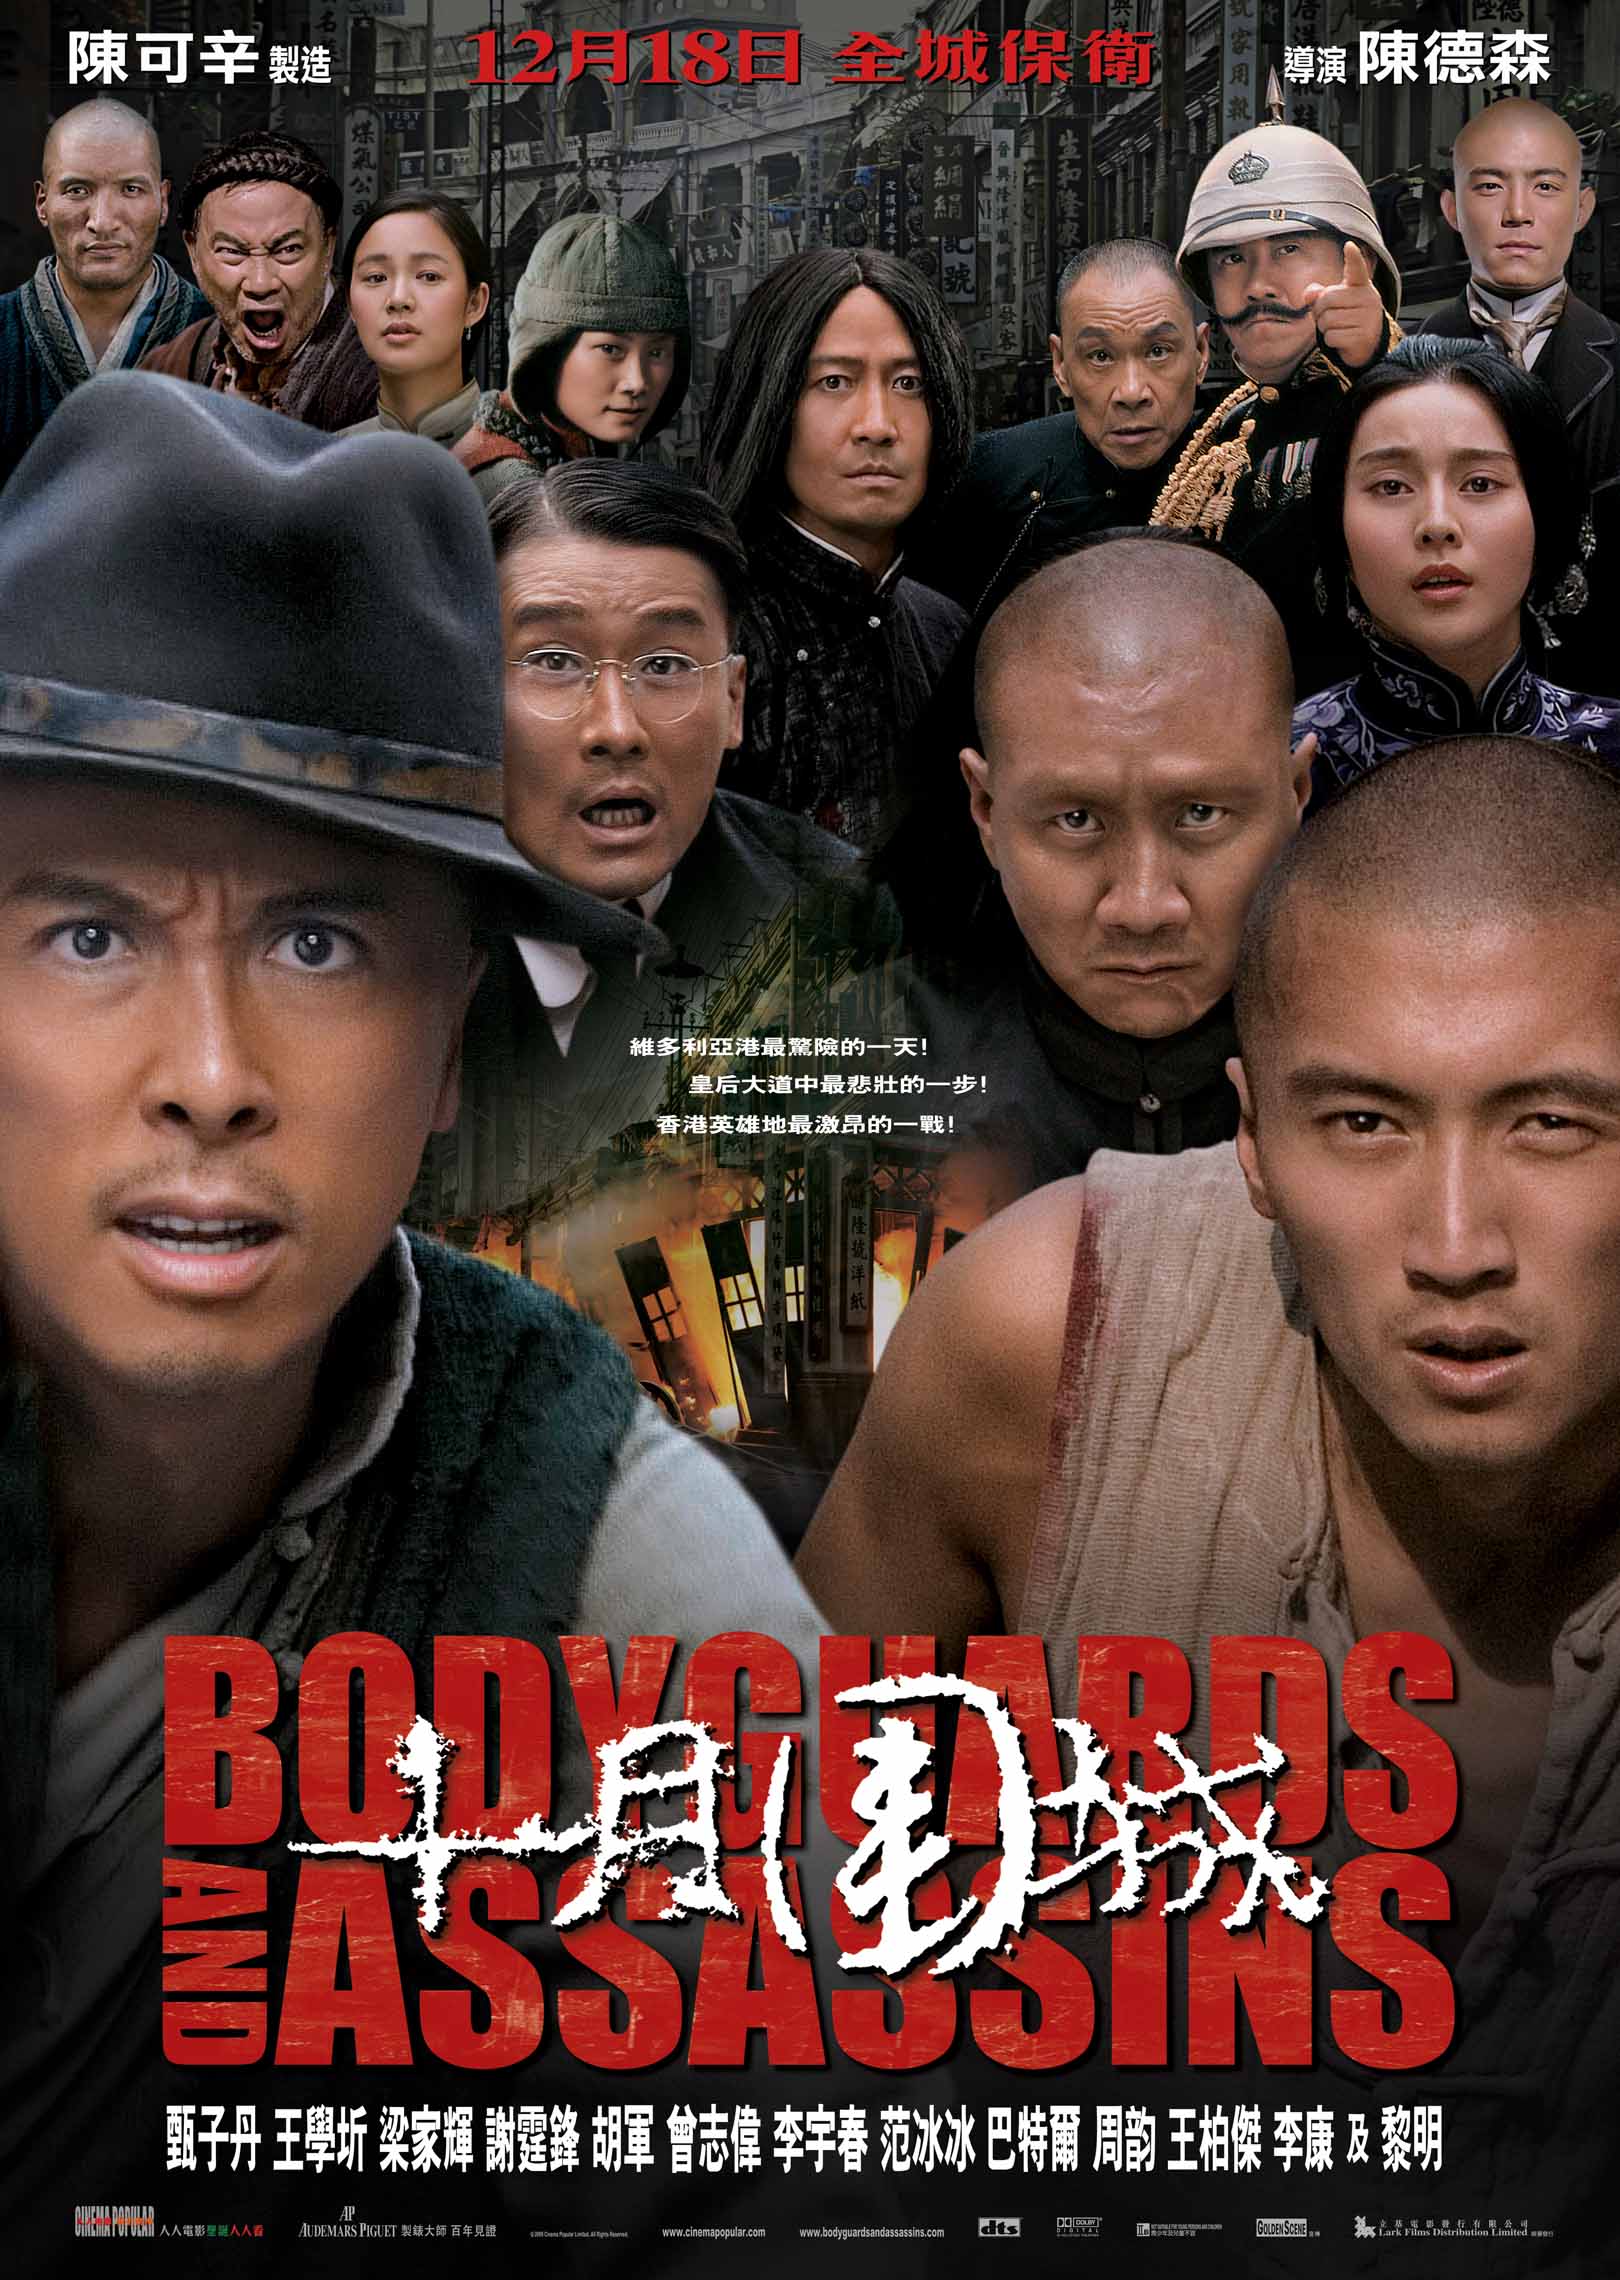 Bodyguards & Assassins with Donnie Yen, Cung Le & Xing Yu